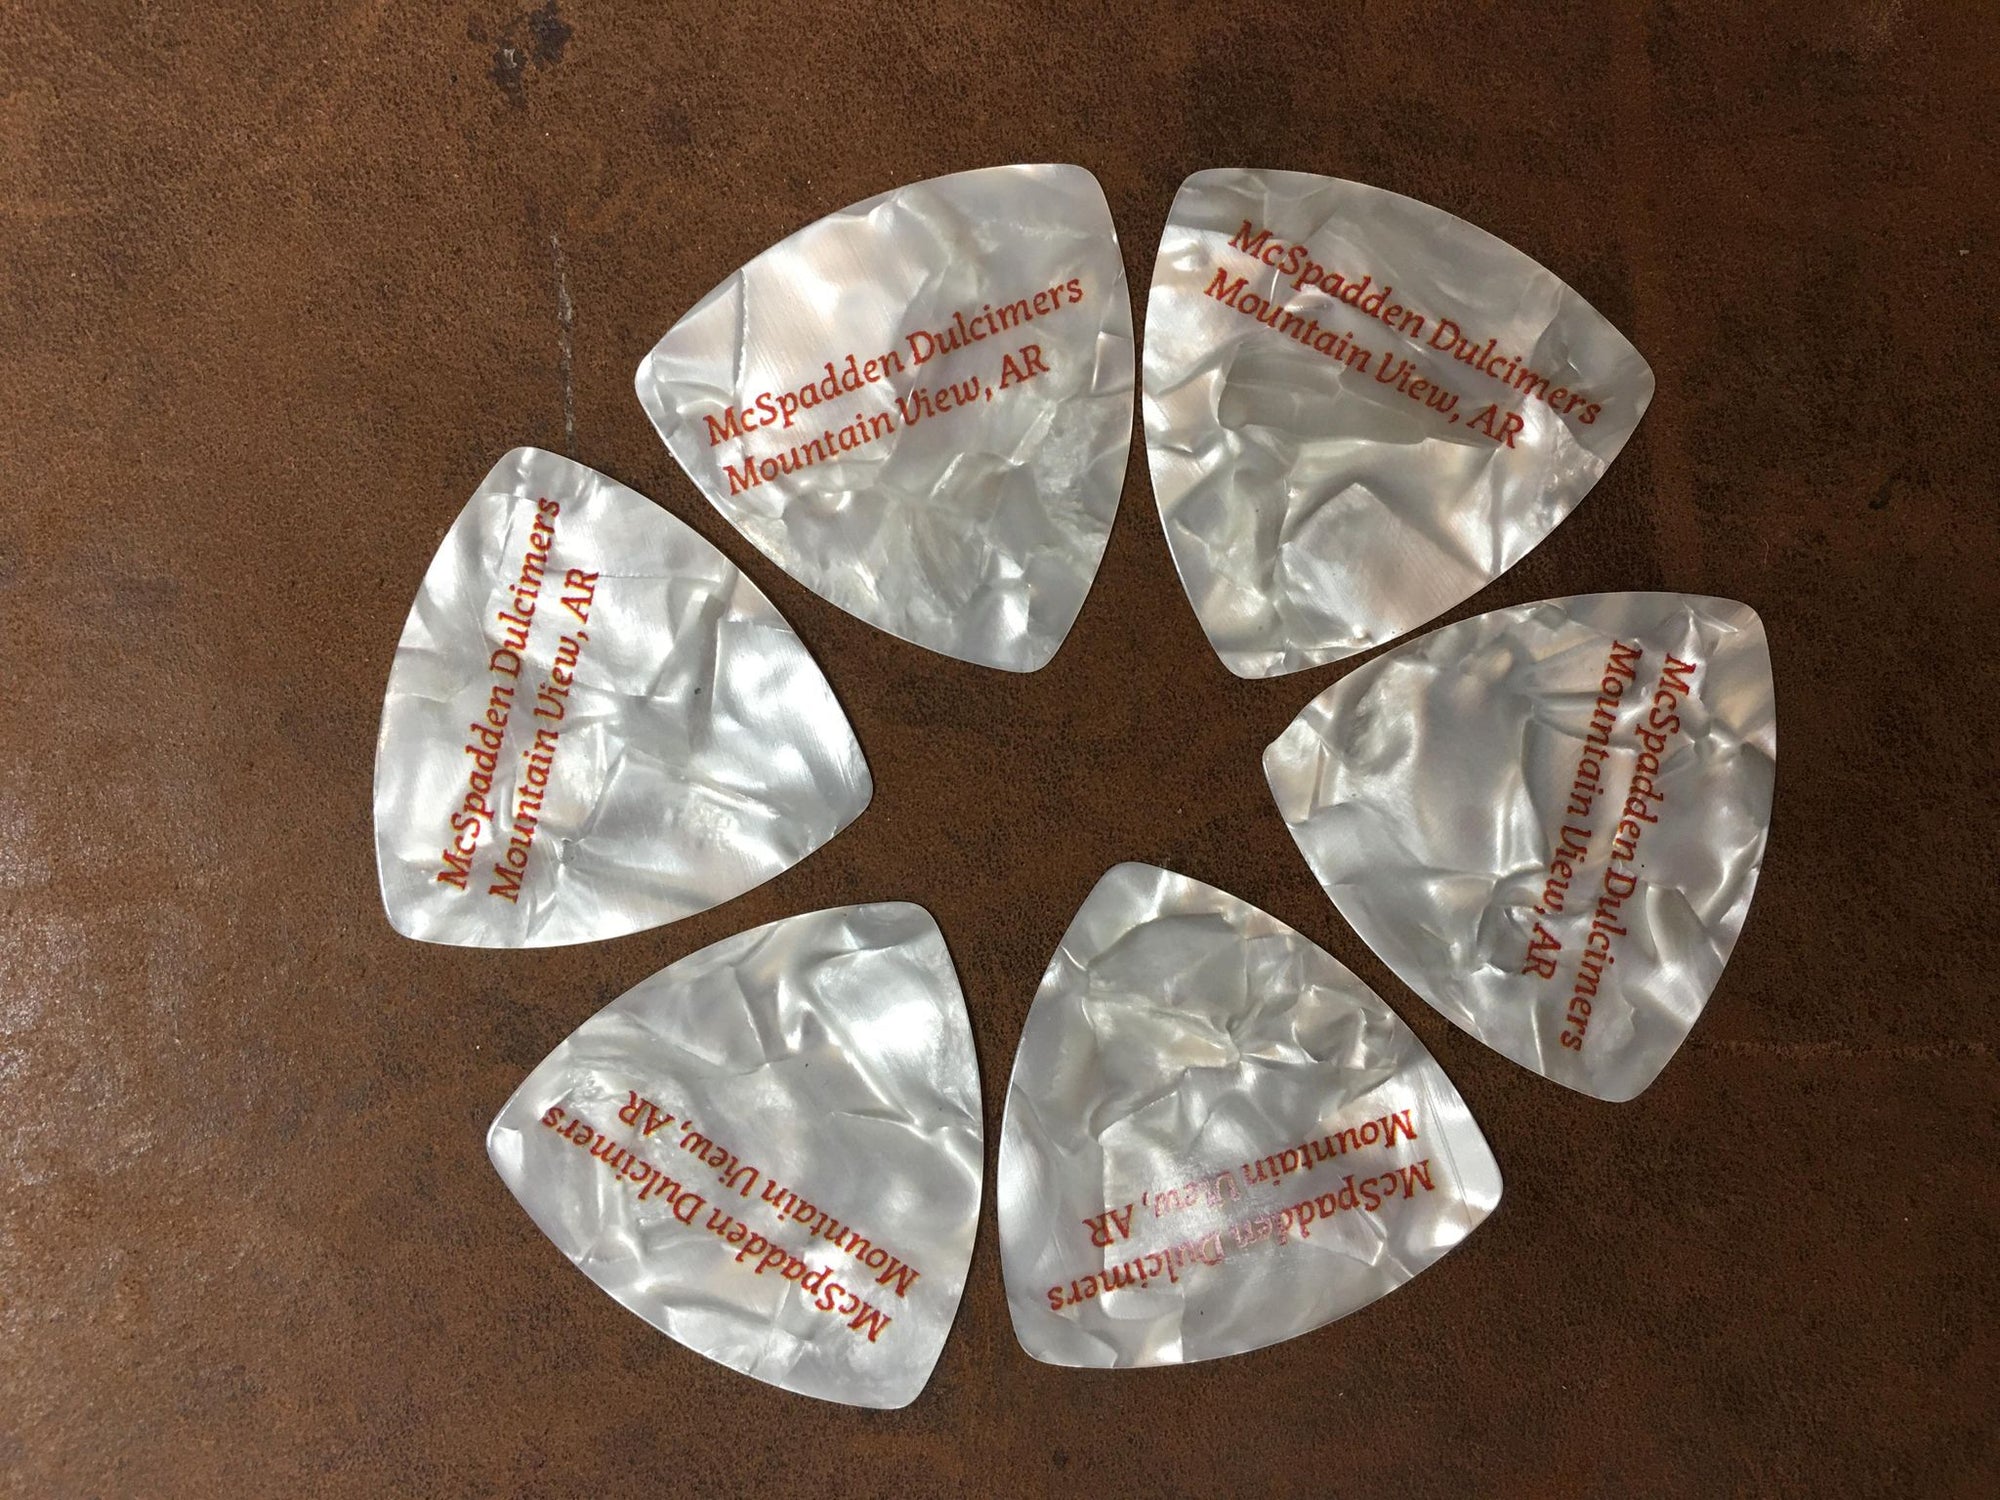 Five McSpadden Picks - Set of 6 guitar picks are arranged in a circle on a table.